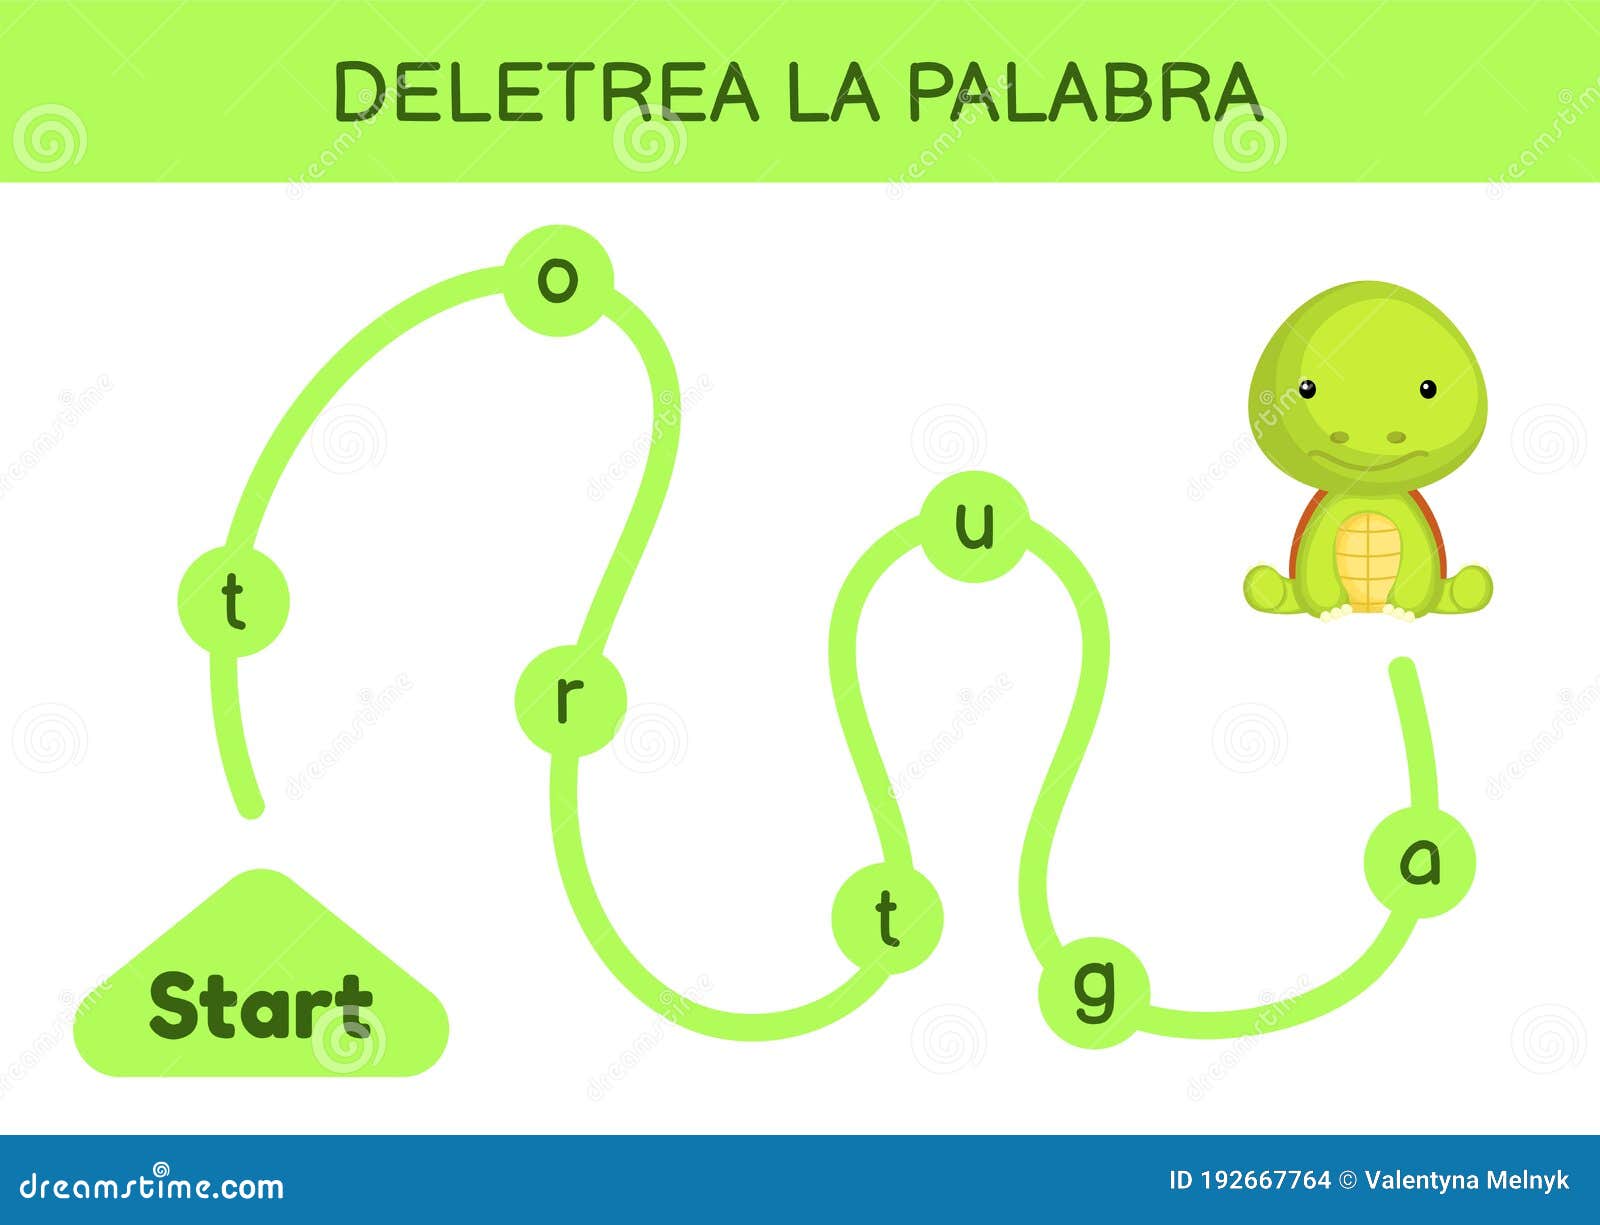 deletrea la palabra - spell the word. maze for kids. spelling word game template. learn to read word turtle. activity page for